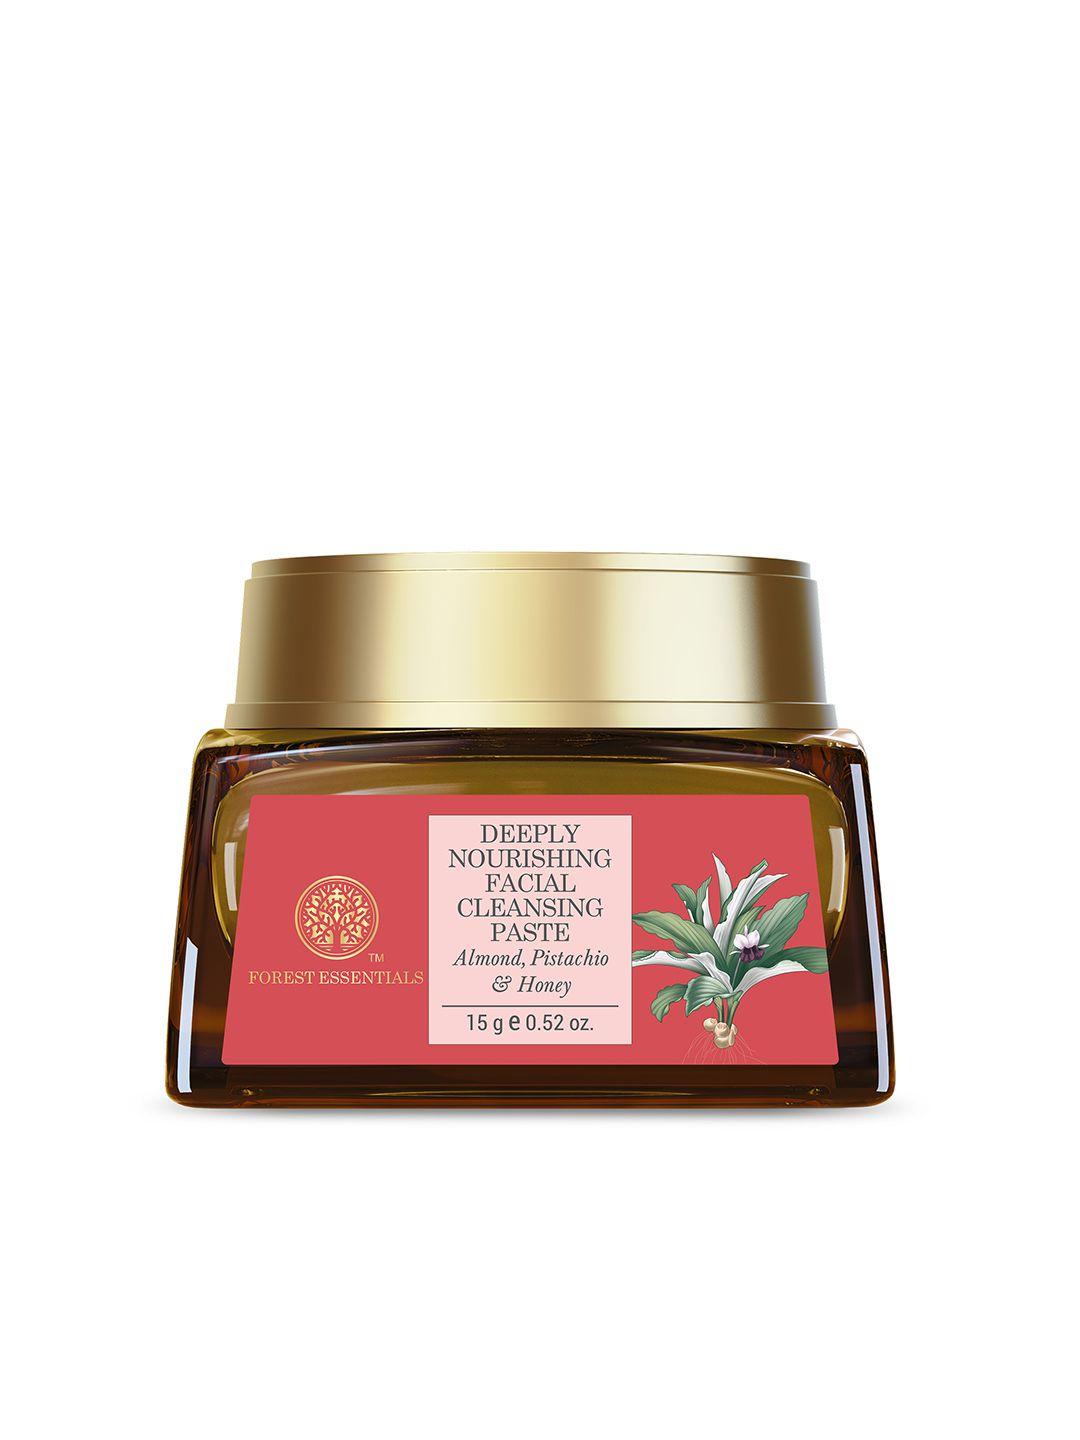 forest essentials deeply nourishing facial cleansing paste with almond & pistachio - 15 g